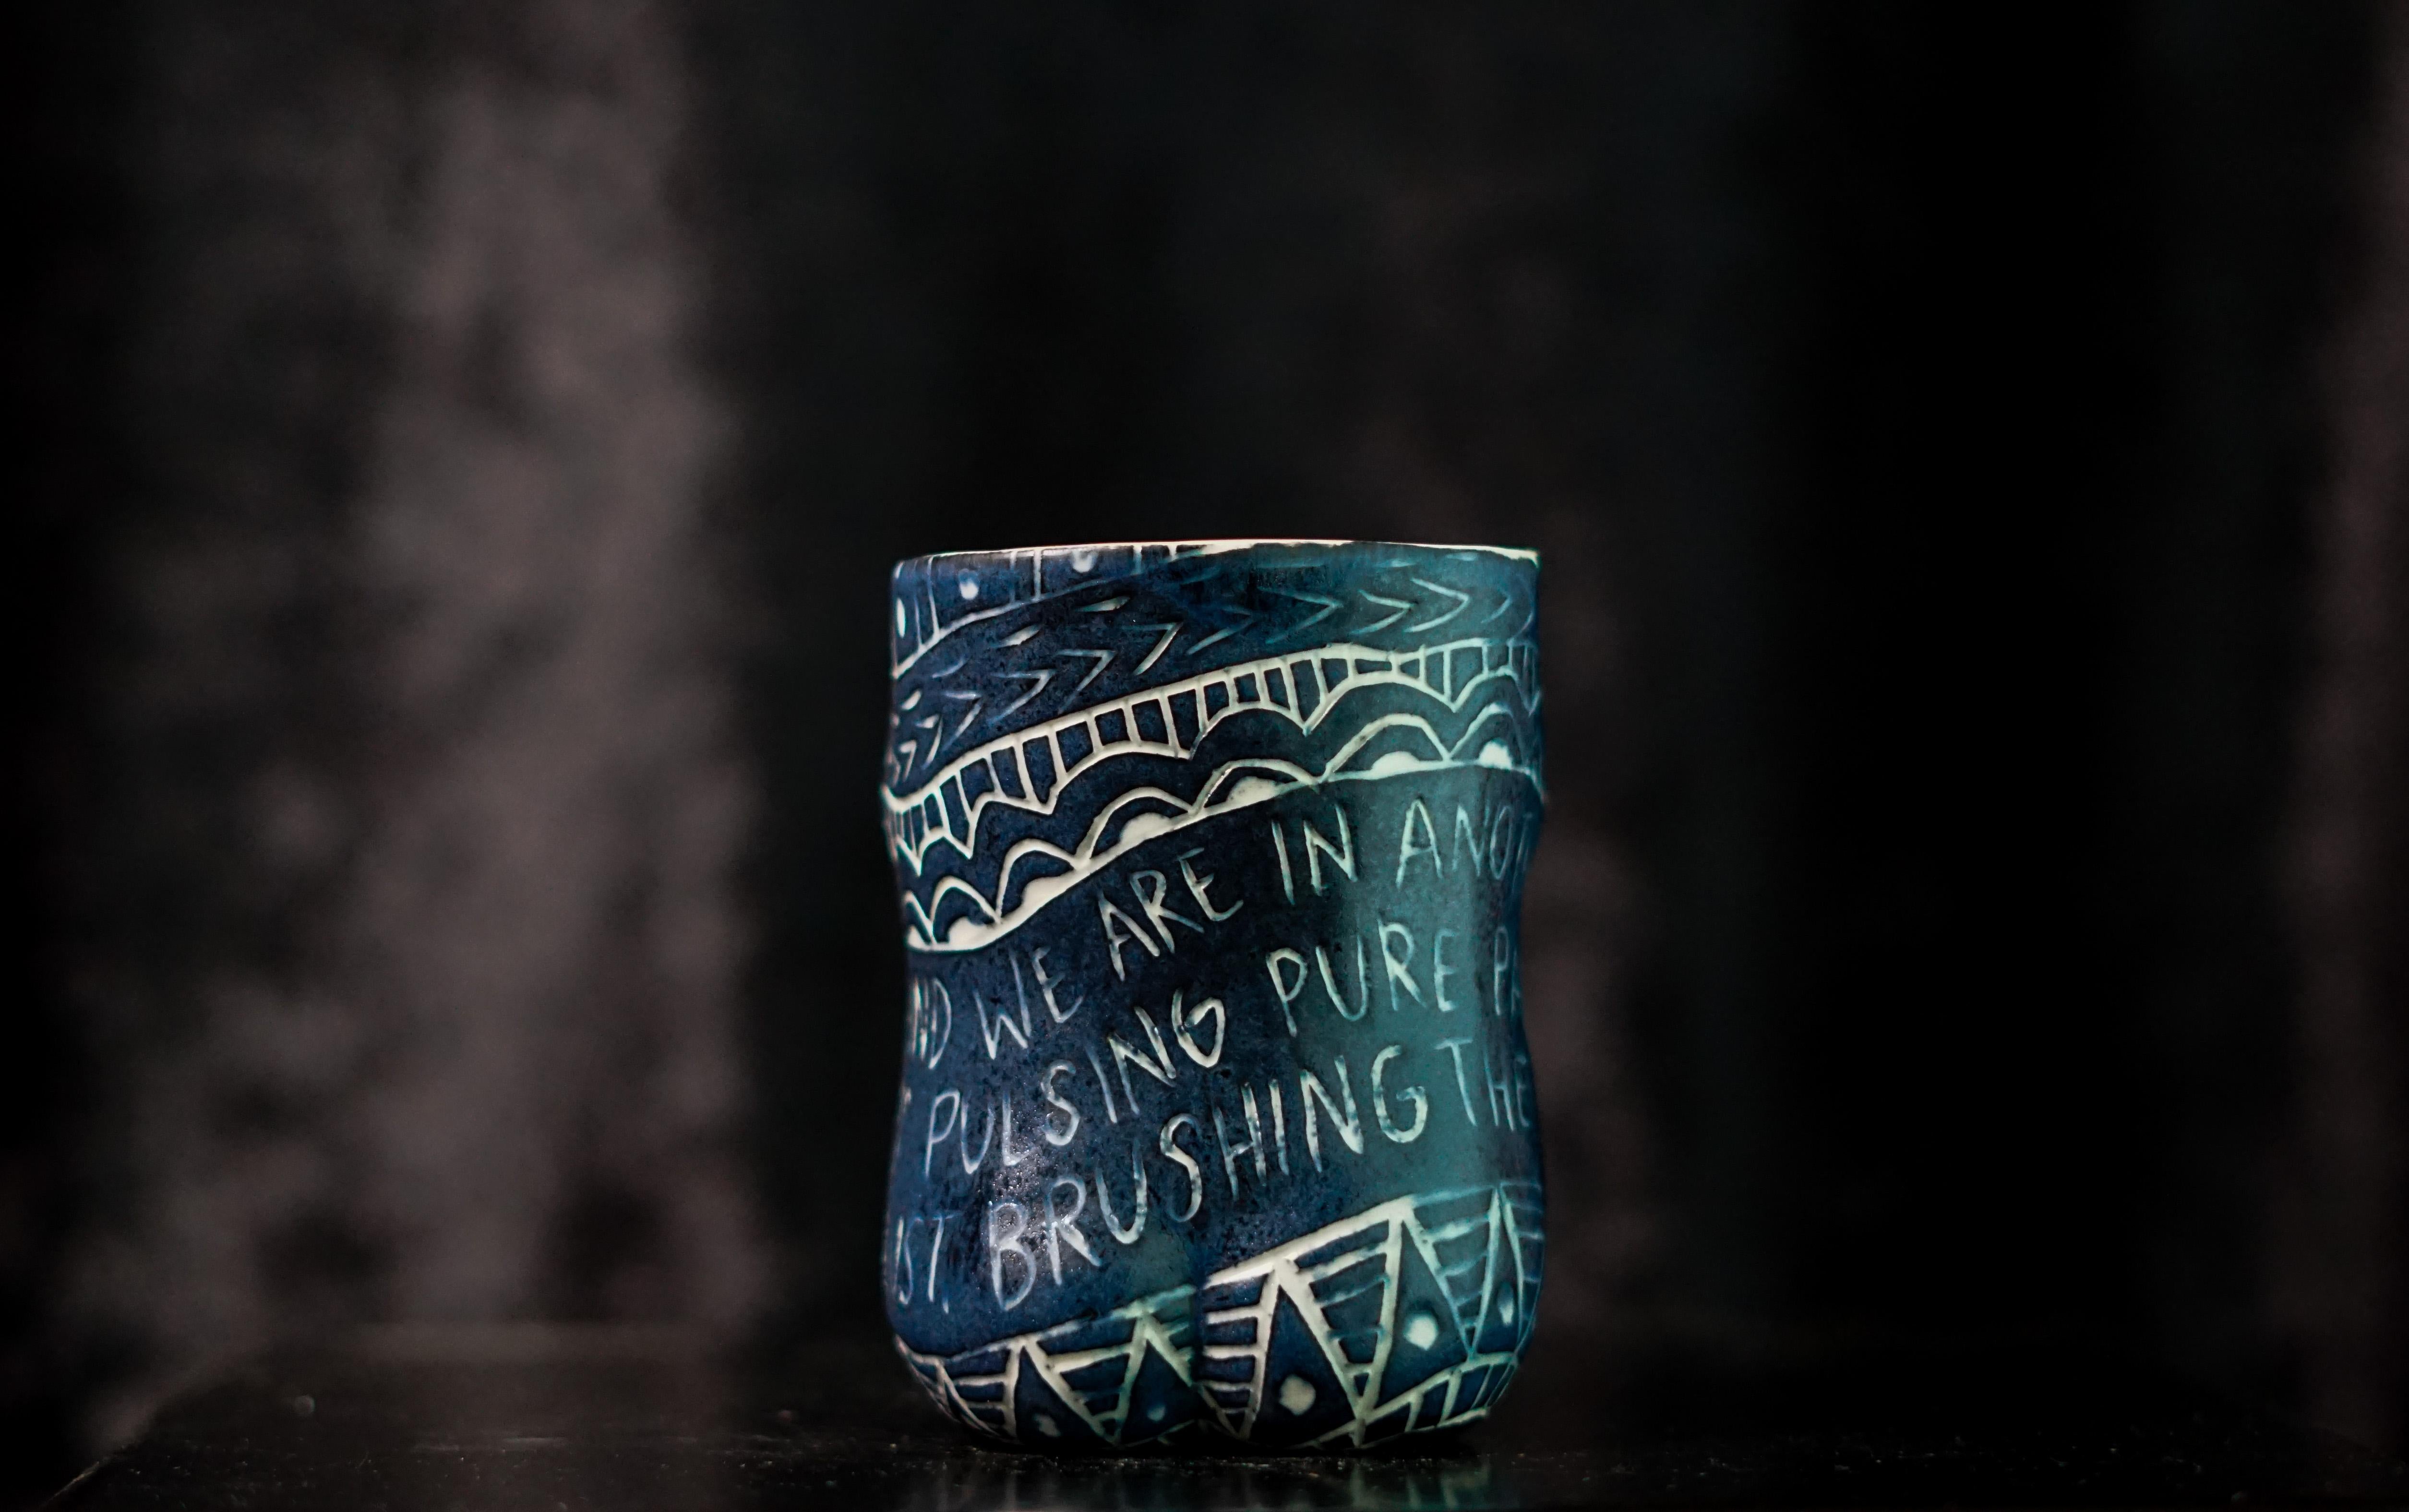 And You Blink.., The Rush of Love, Here I Learn, 2019 Trpitych
From the series Fragments of Our Love Story
Porcelain cup with sgraffito detailing
Overall size: 4 x 9 x 3 inches. 
Individual size: 4 x 3 x 3 inches. 

“And you blink..” And you blink